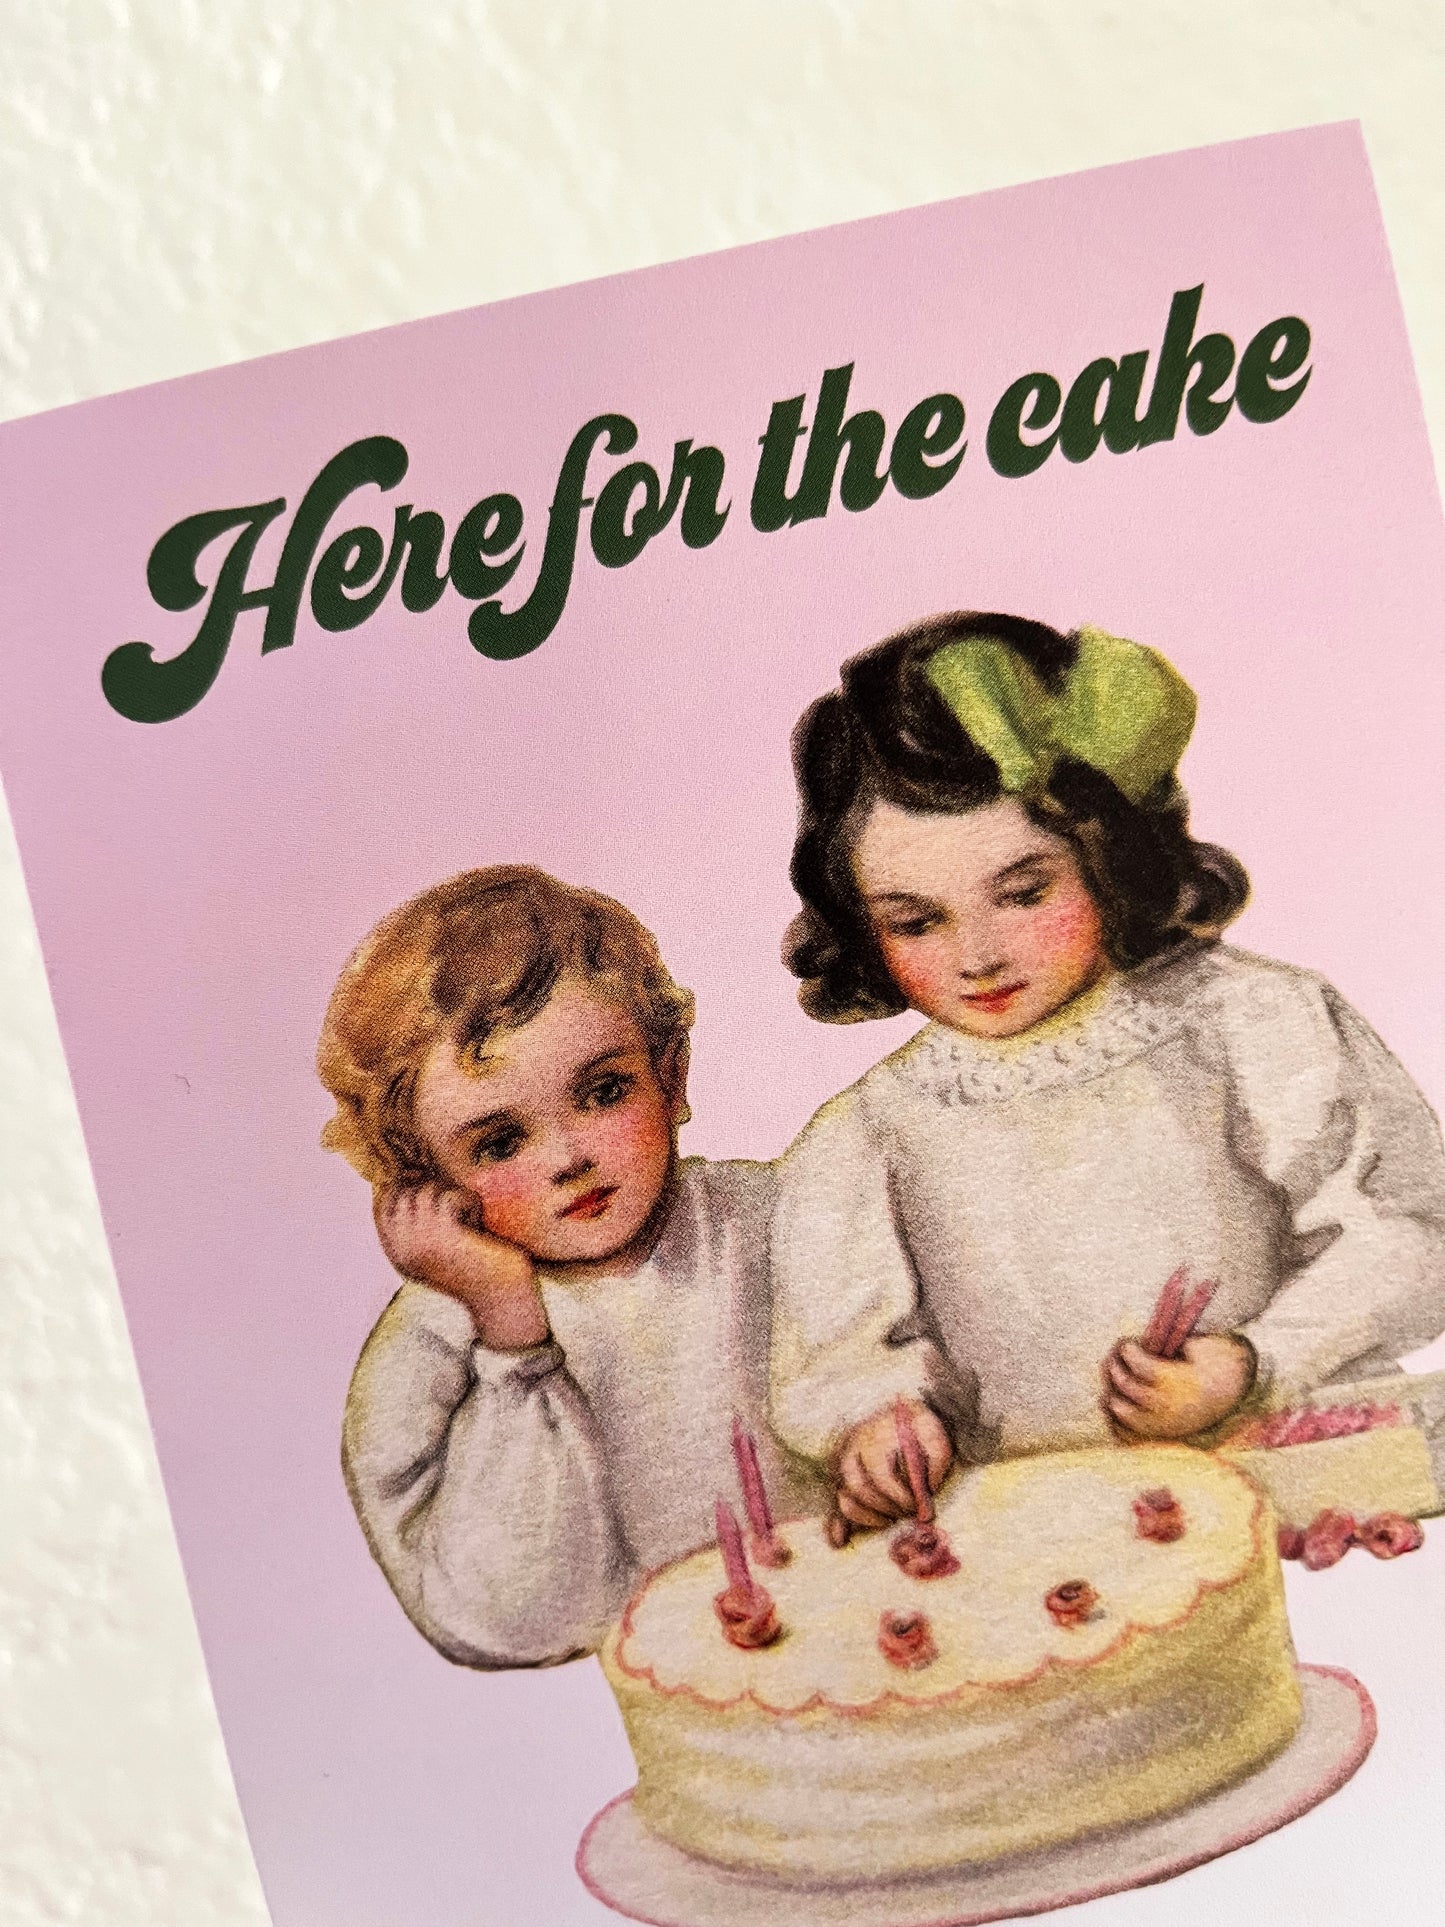 two kids boy and girl putting candles on white cake with pink candles pastel cute retro vintage style holiday birthday celebration card funny here for the cake